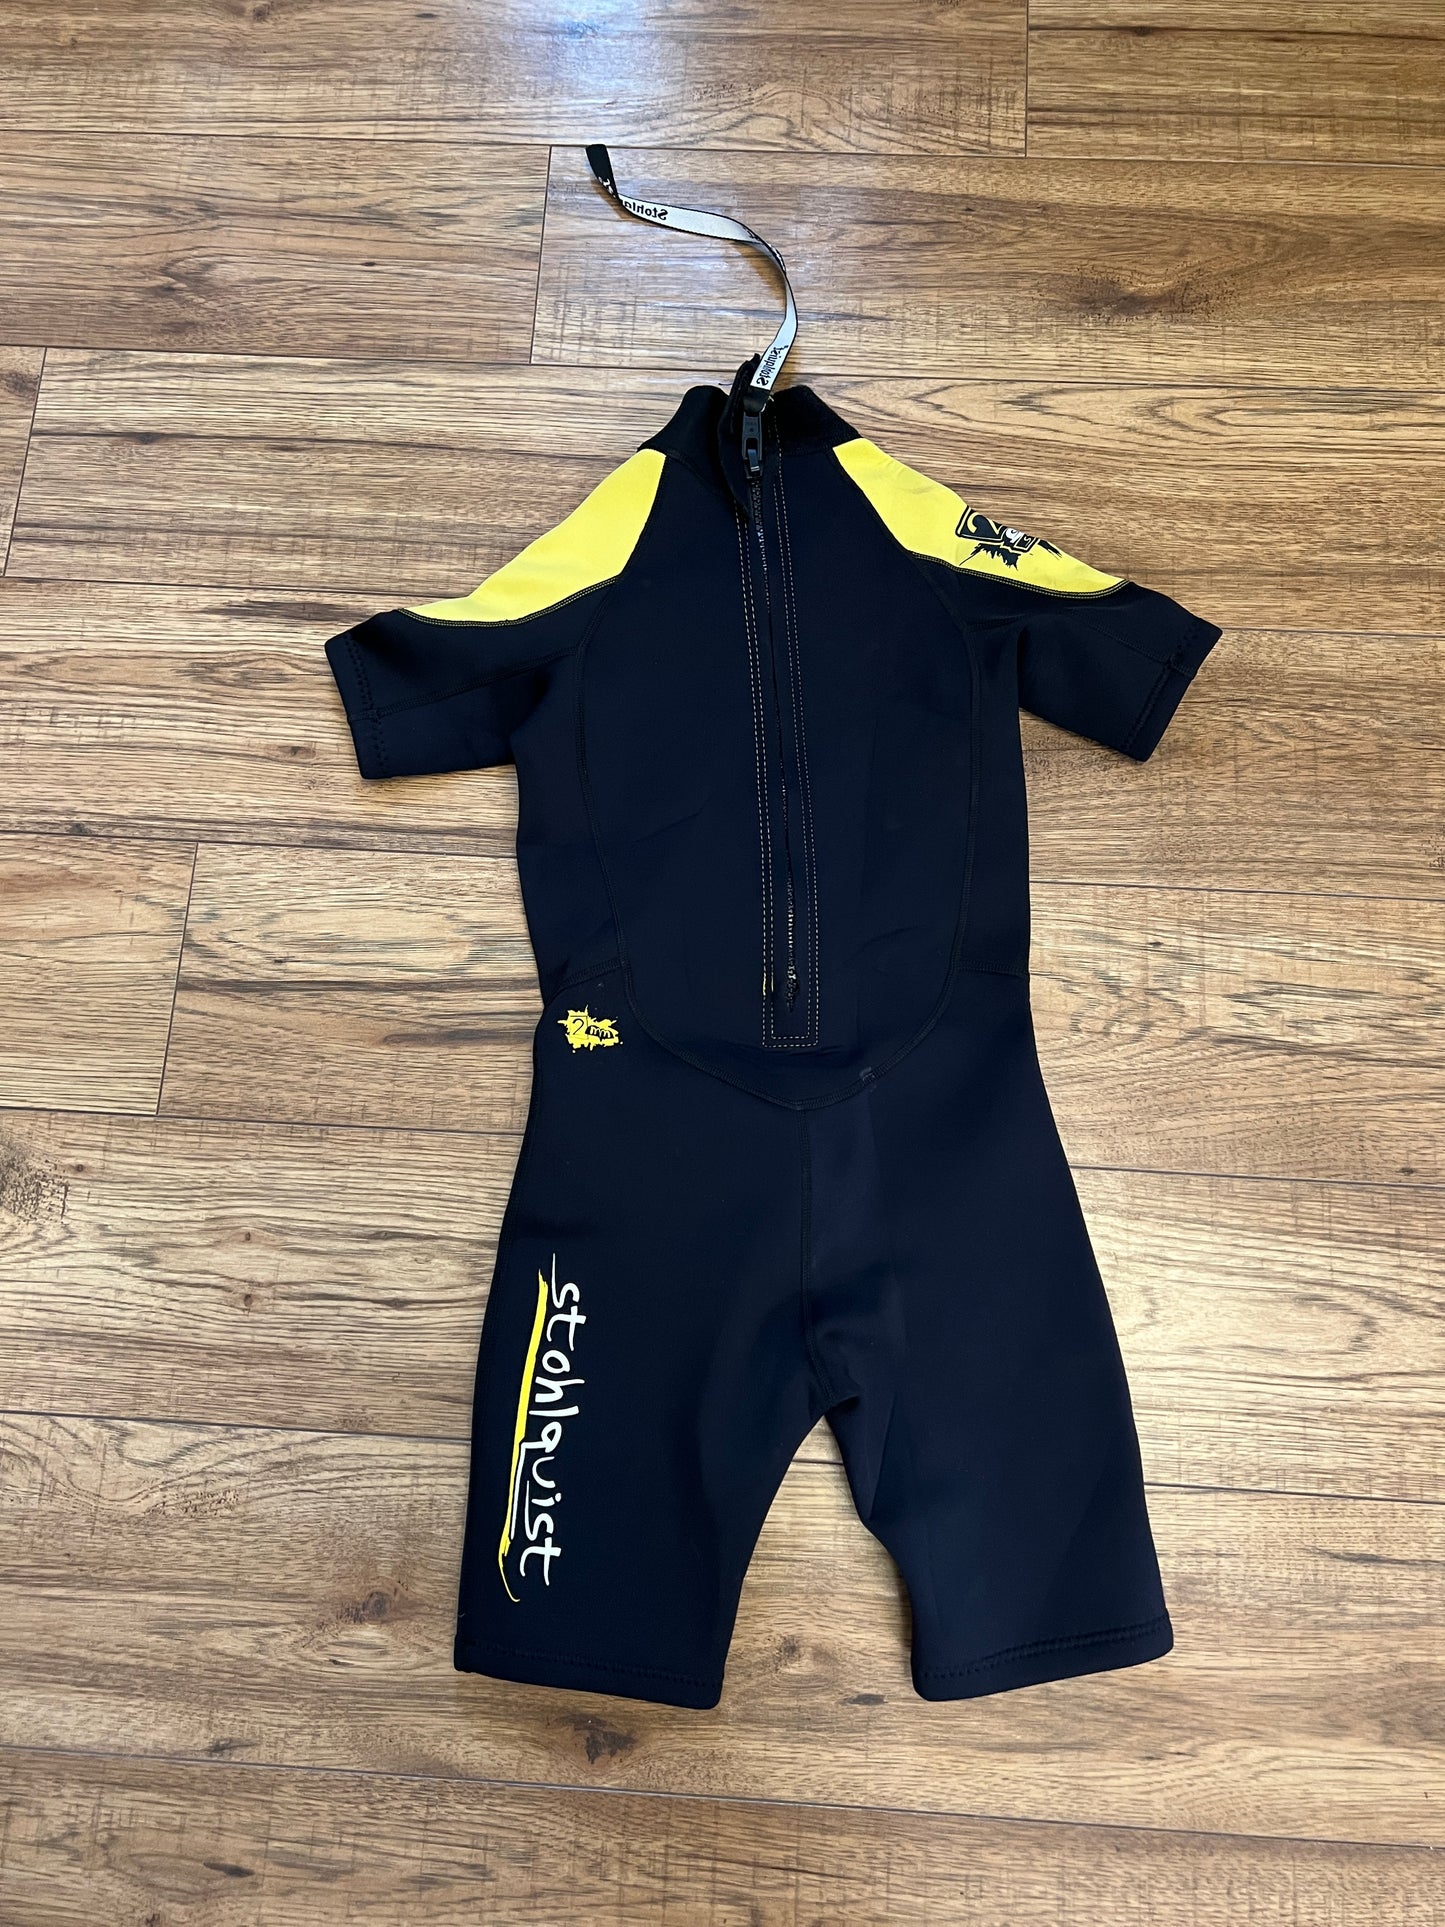 Wetsuit Child Size Large 7-8 Stohlquist Black Yellow 2-3mm Neoprene Excellent